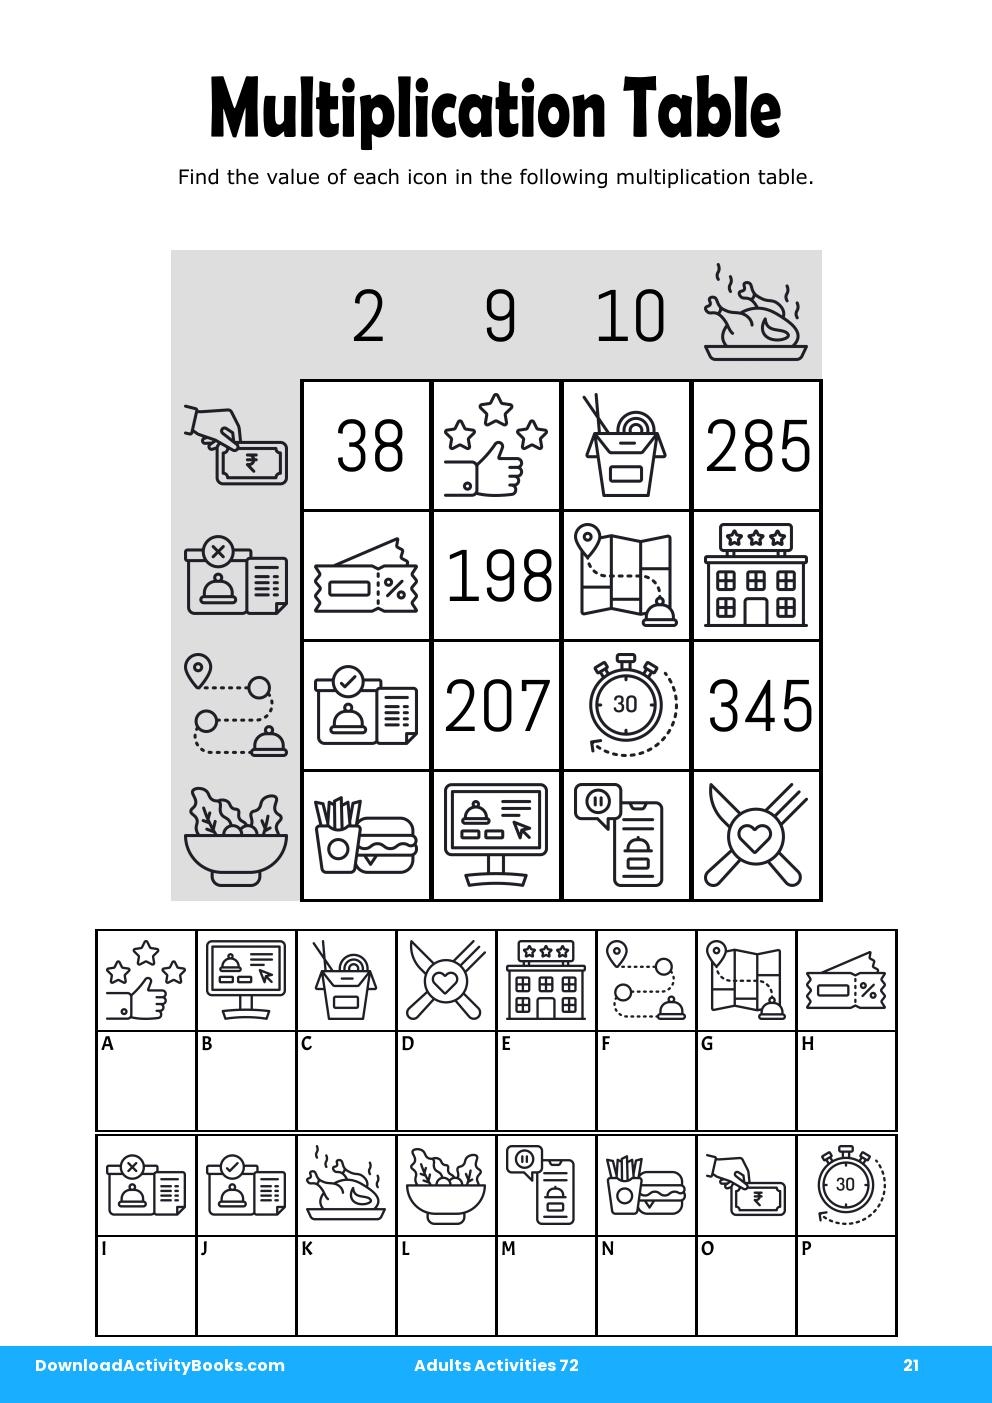 Multiplication Table in Adults Activities 72